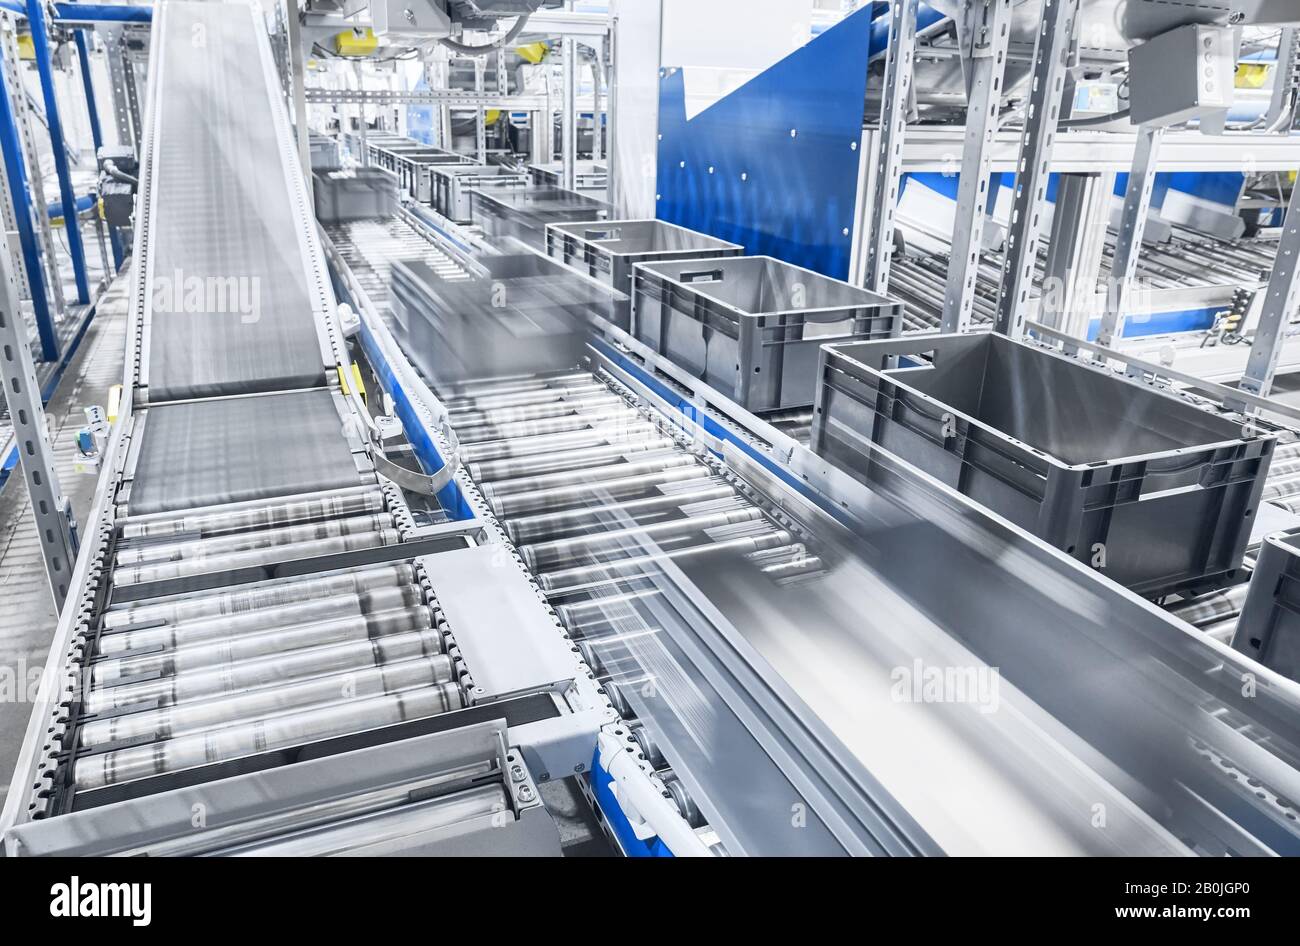 Modern conveyor system with boxes in motion, shallow depth of field. Stock Photo